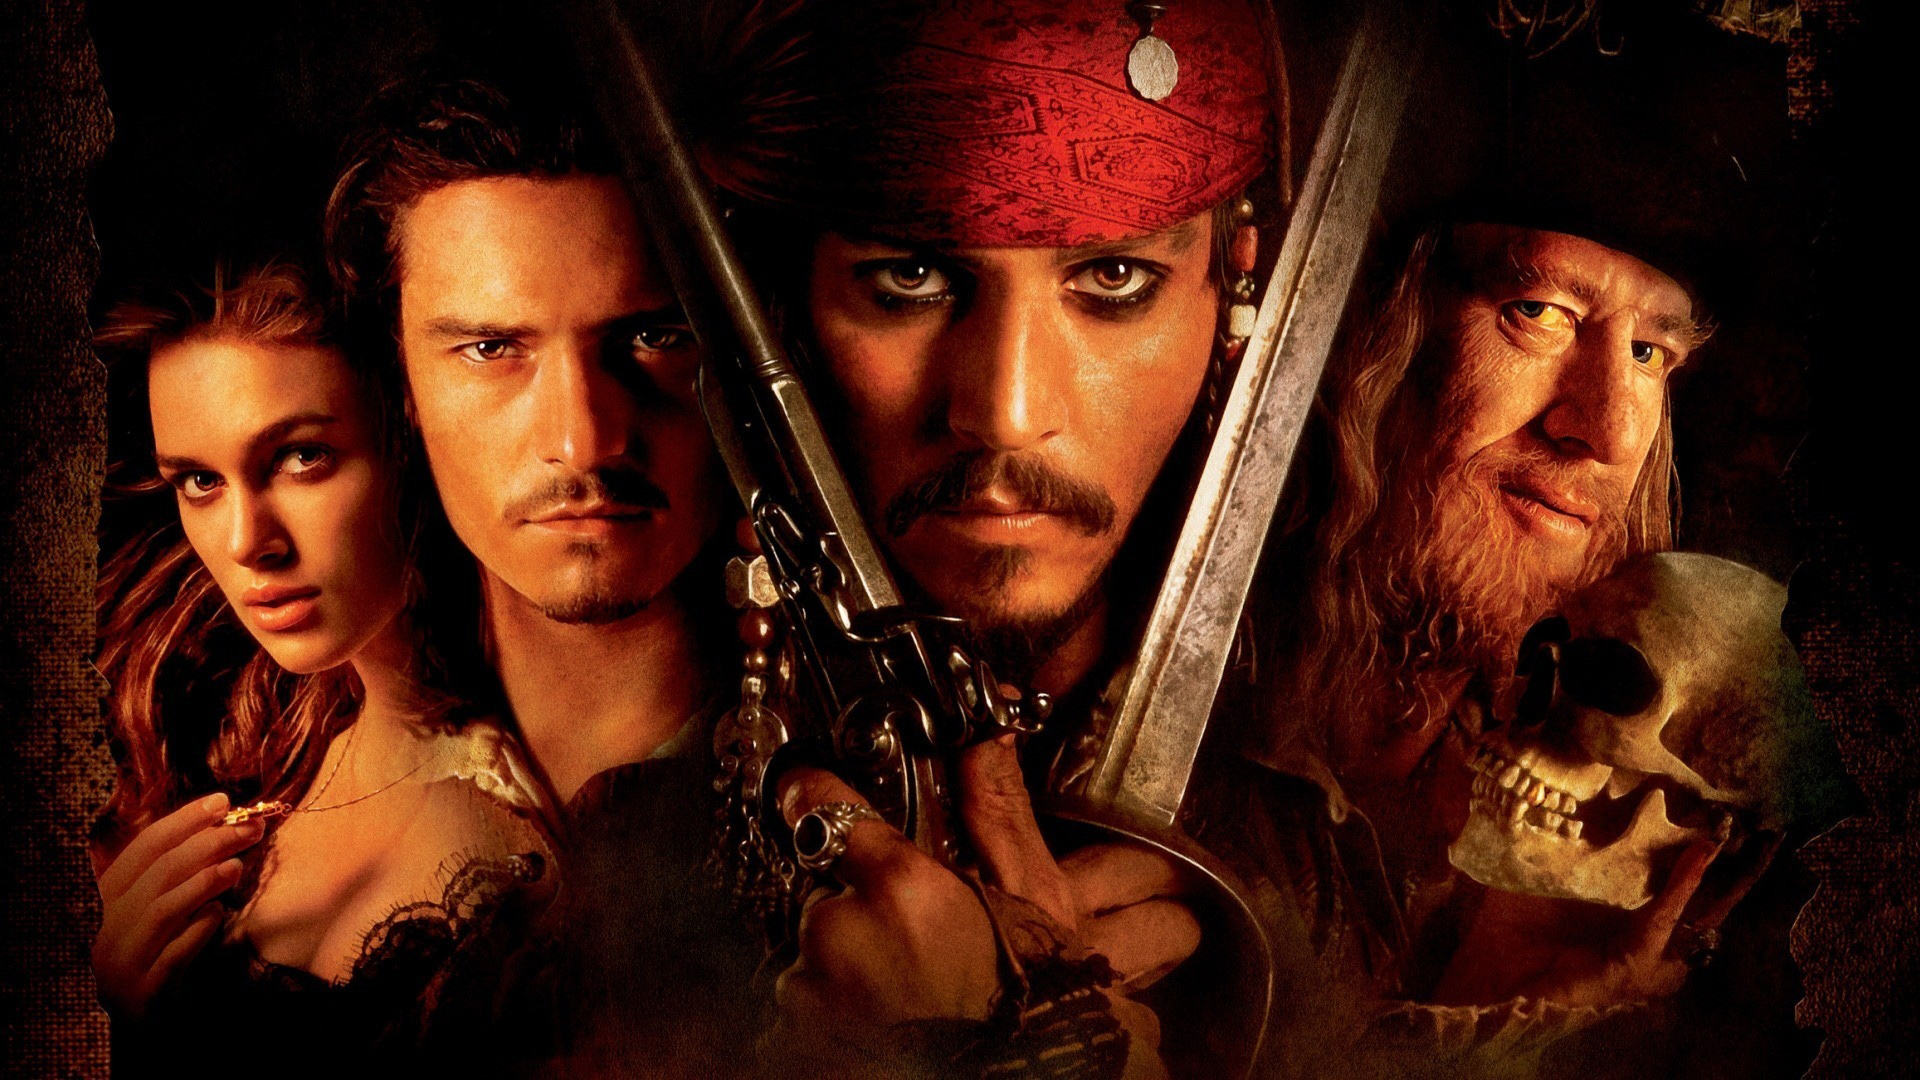 elizabeth swann, pirates of the caribbean: the curse of the black pearl, jack sparrow, pirates of the caribbean, johnny depp, movie, geoffrey rush, hector barbossa, keira knightley, orlando bloom, will turner Phone Background